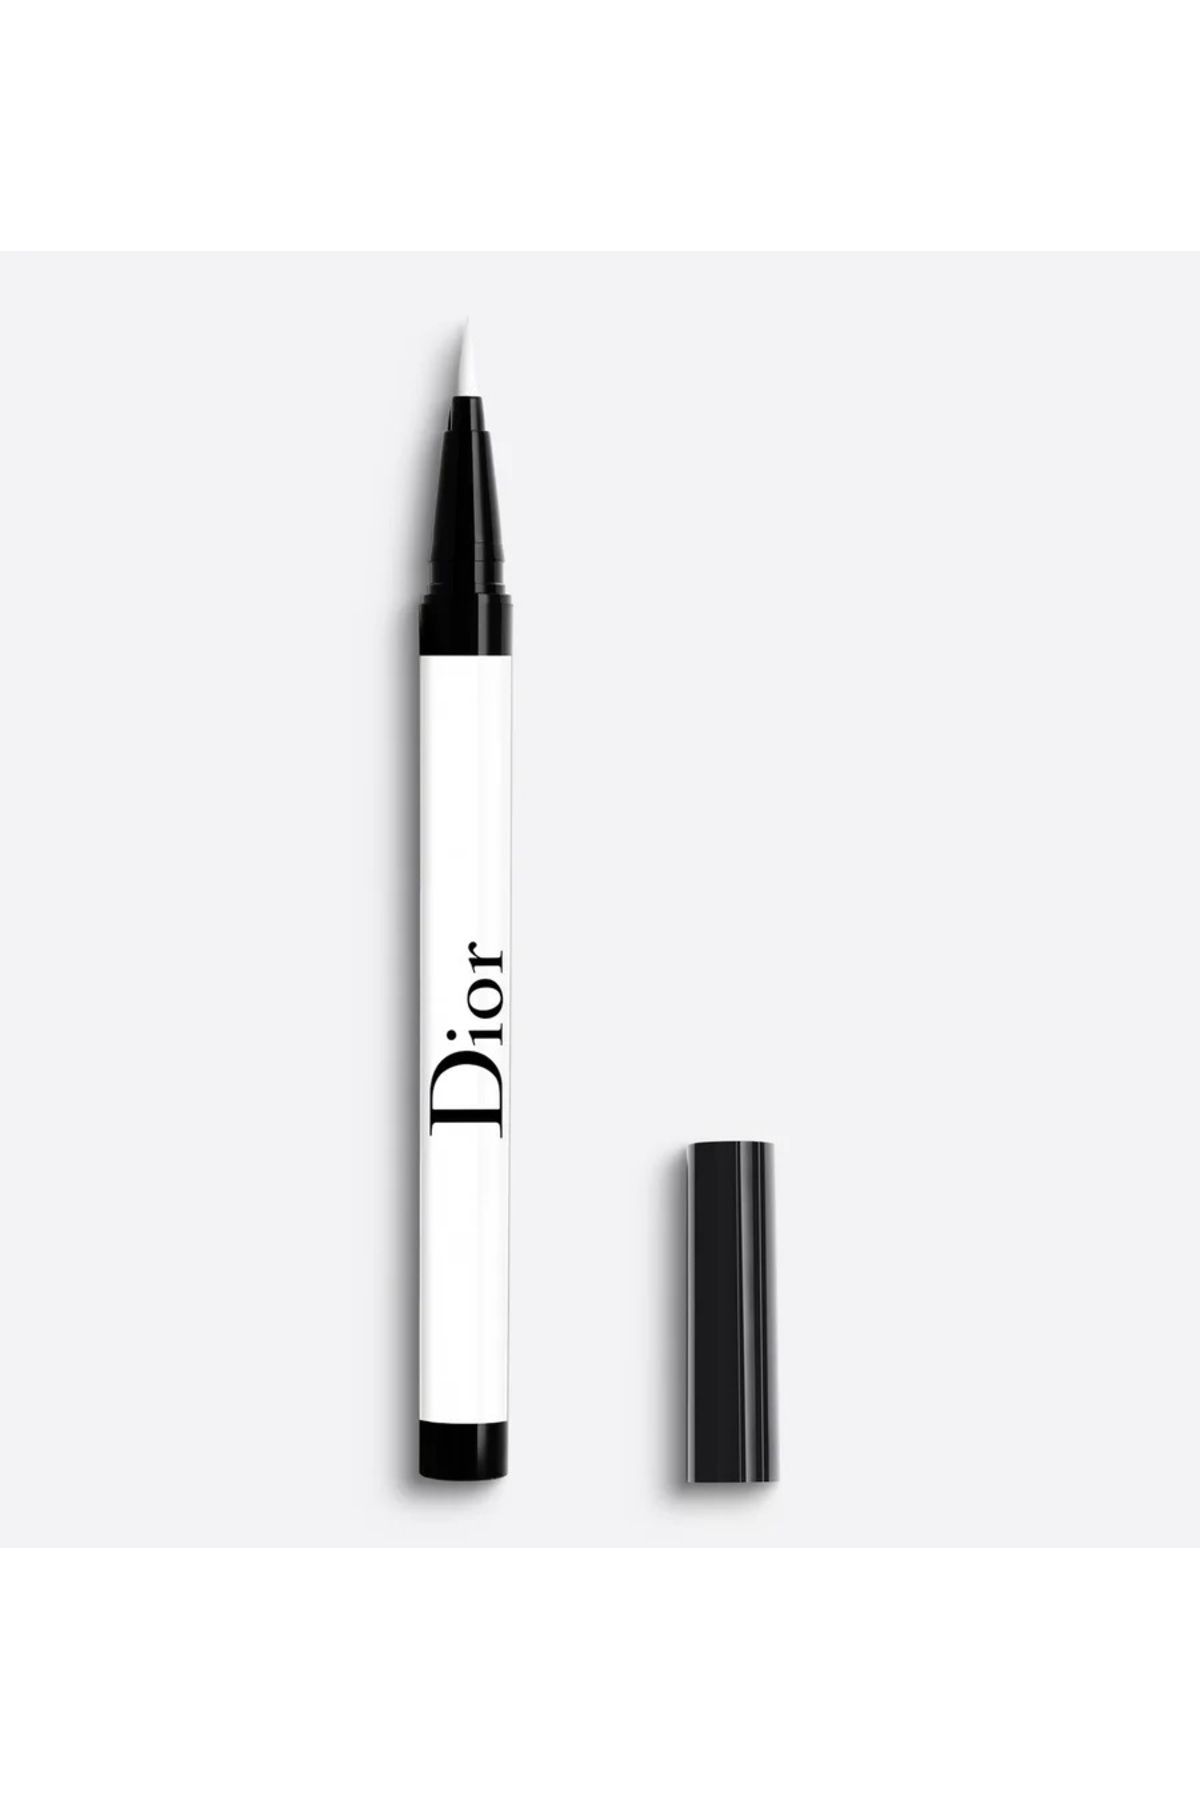 Dior 24 HOUR EFFECTİVE, LONG LASTİNG, INTENSELY PİGMENTED, SATİN-MATTE FİNİSH EYELİNER PSSN1974